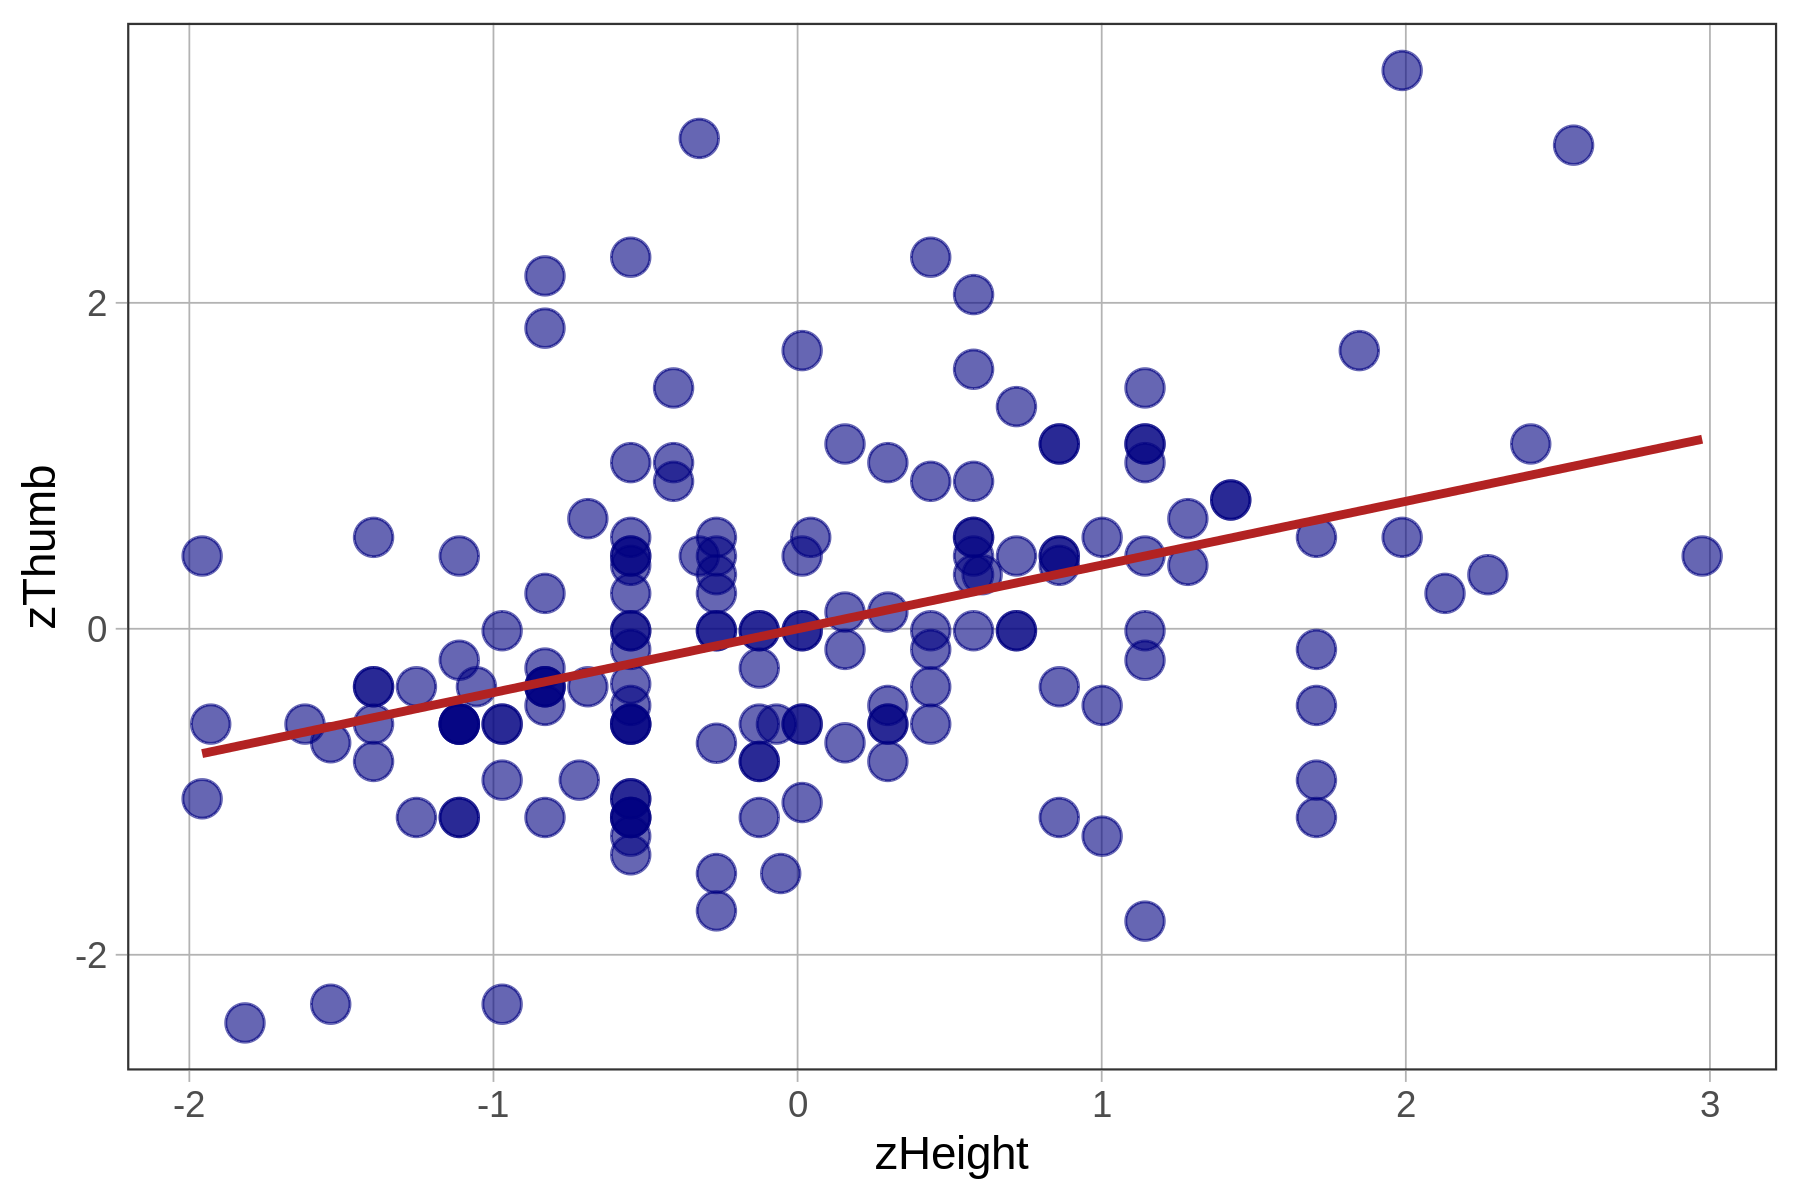 A scatterplot of the distribution of zThumb by zHeight overlaid with best-fitting regression line. The two distributions look the same except the scale of the axes.